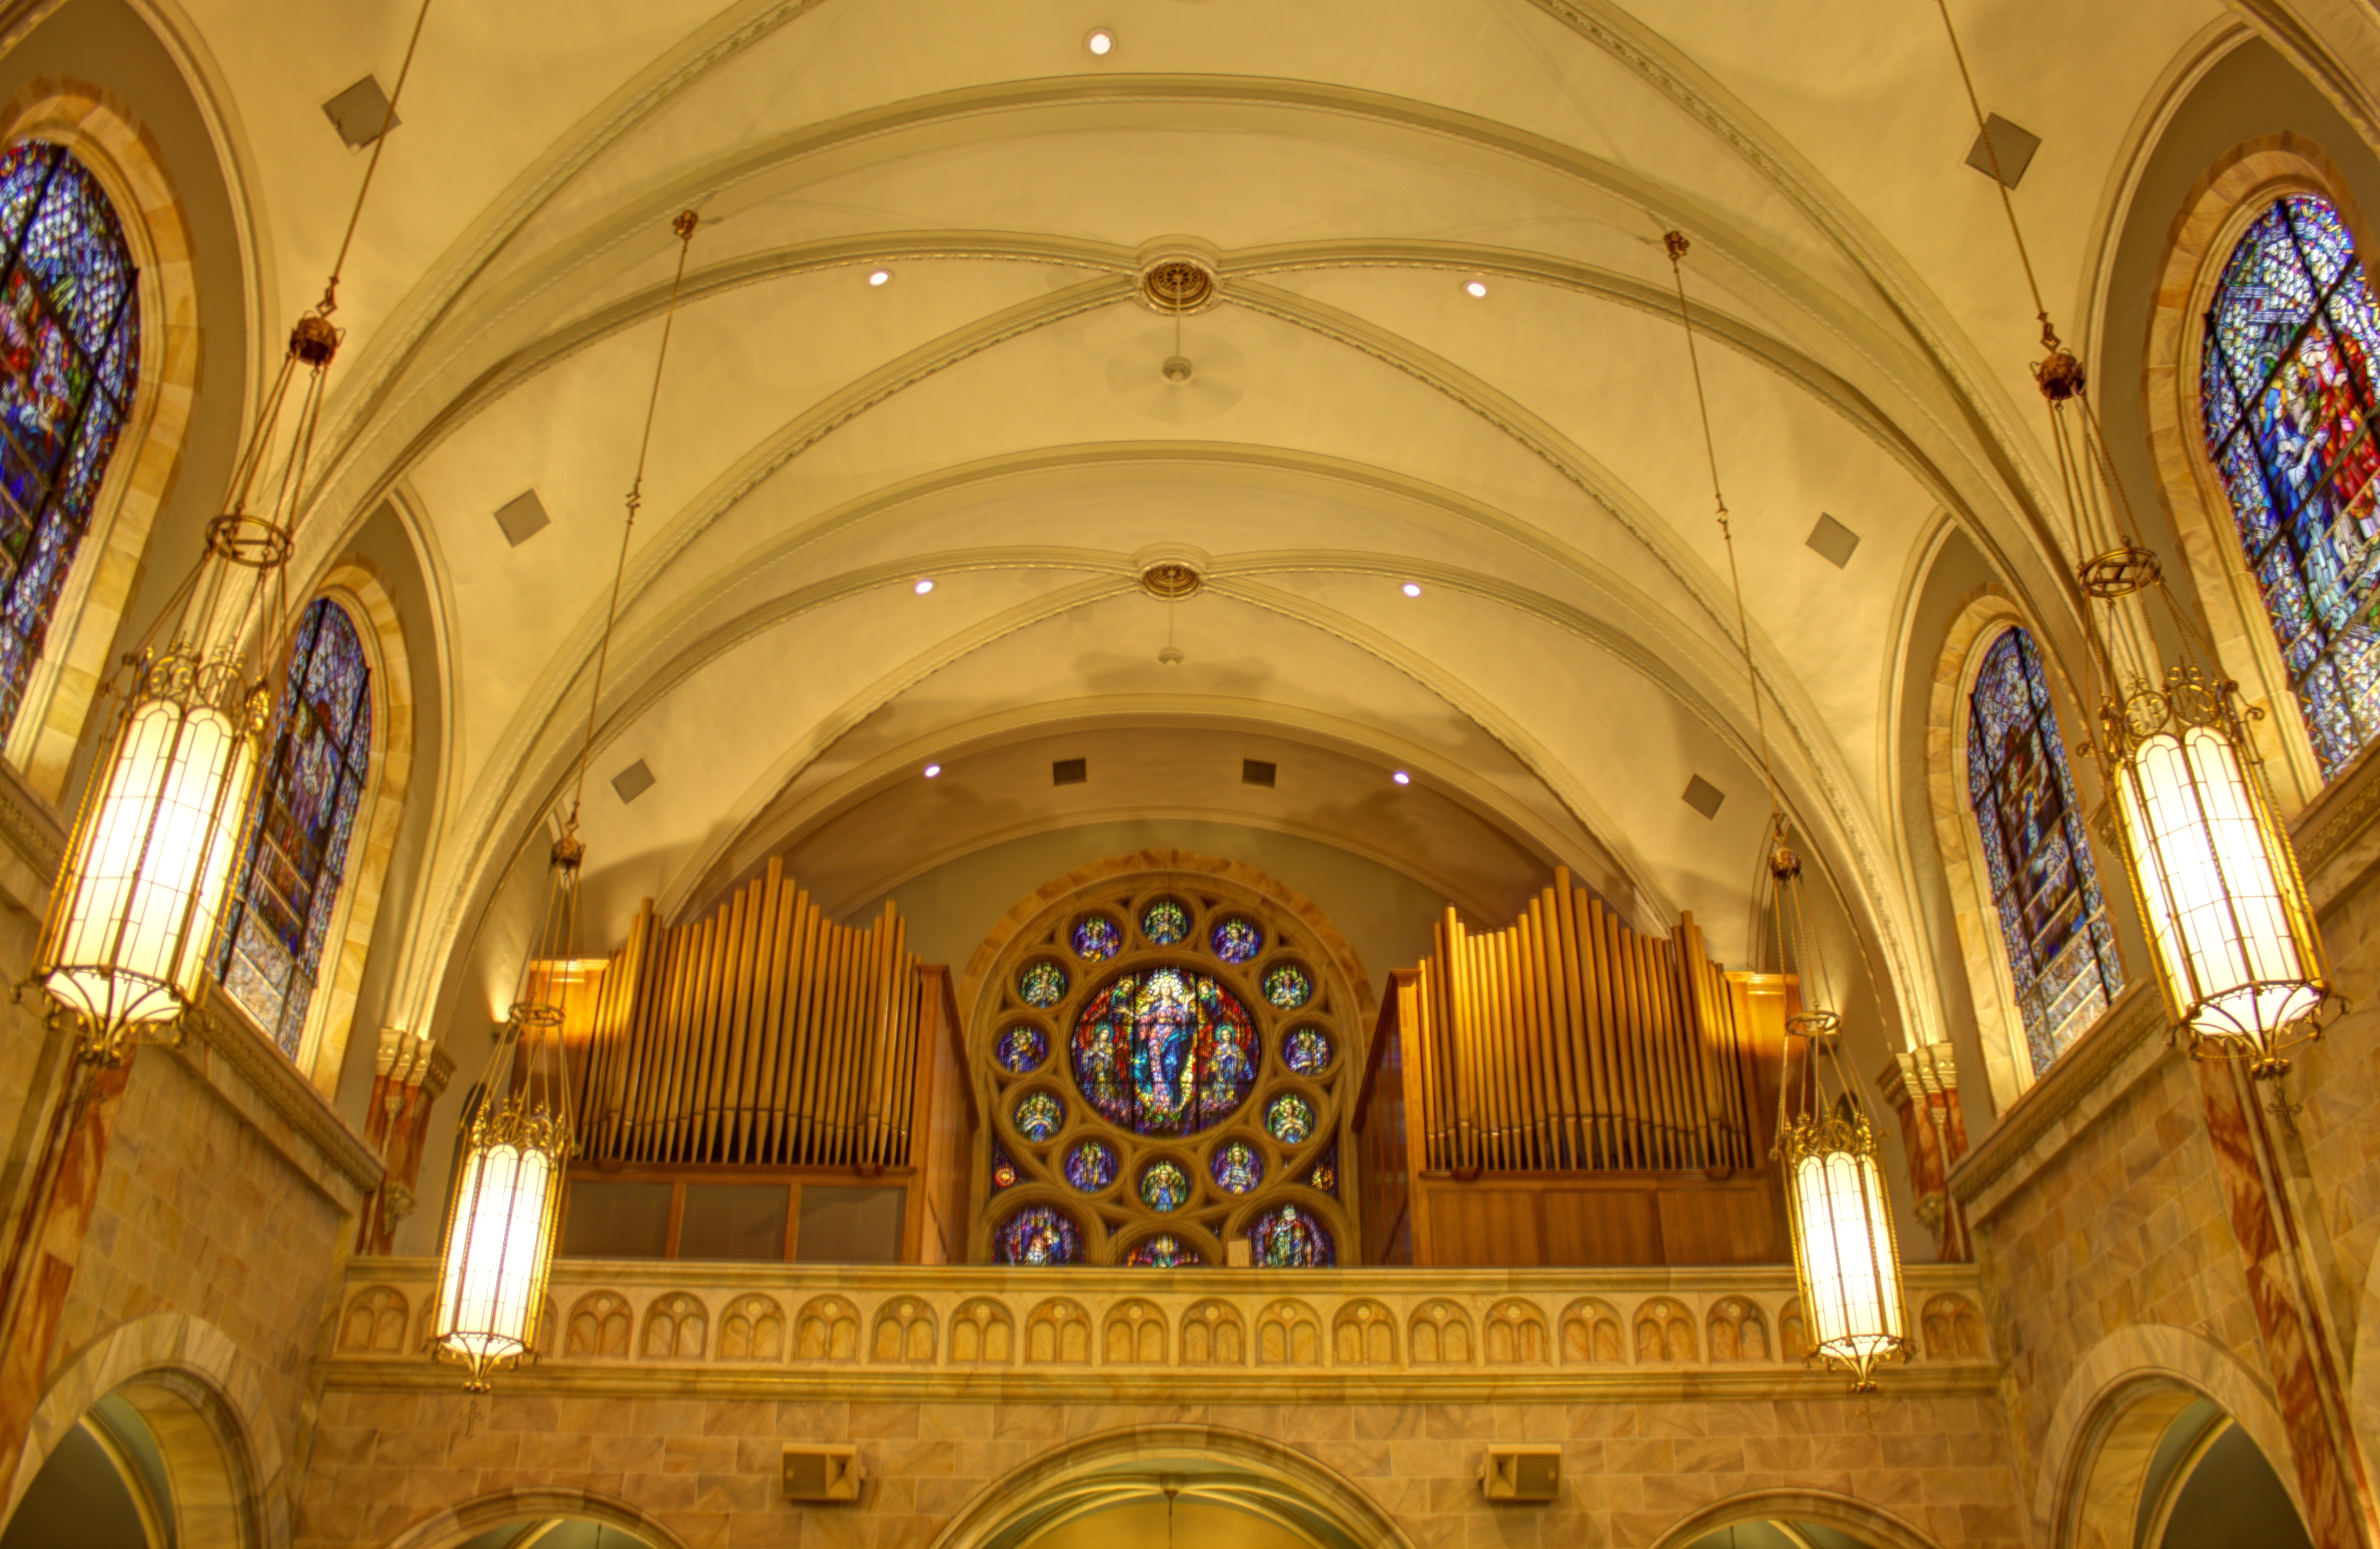 Another look inside the Basilica at Holy Hill, Wisconsin image - Free